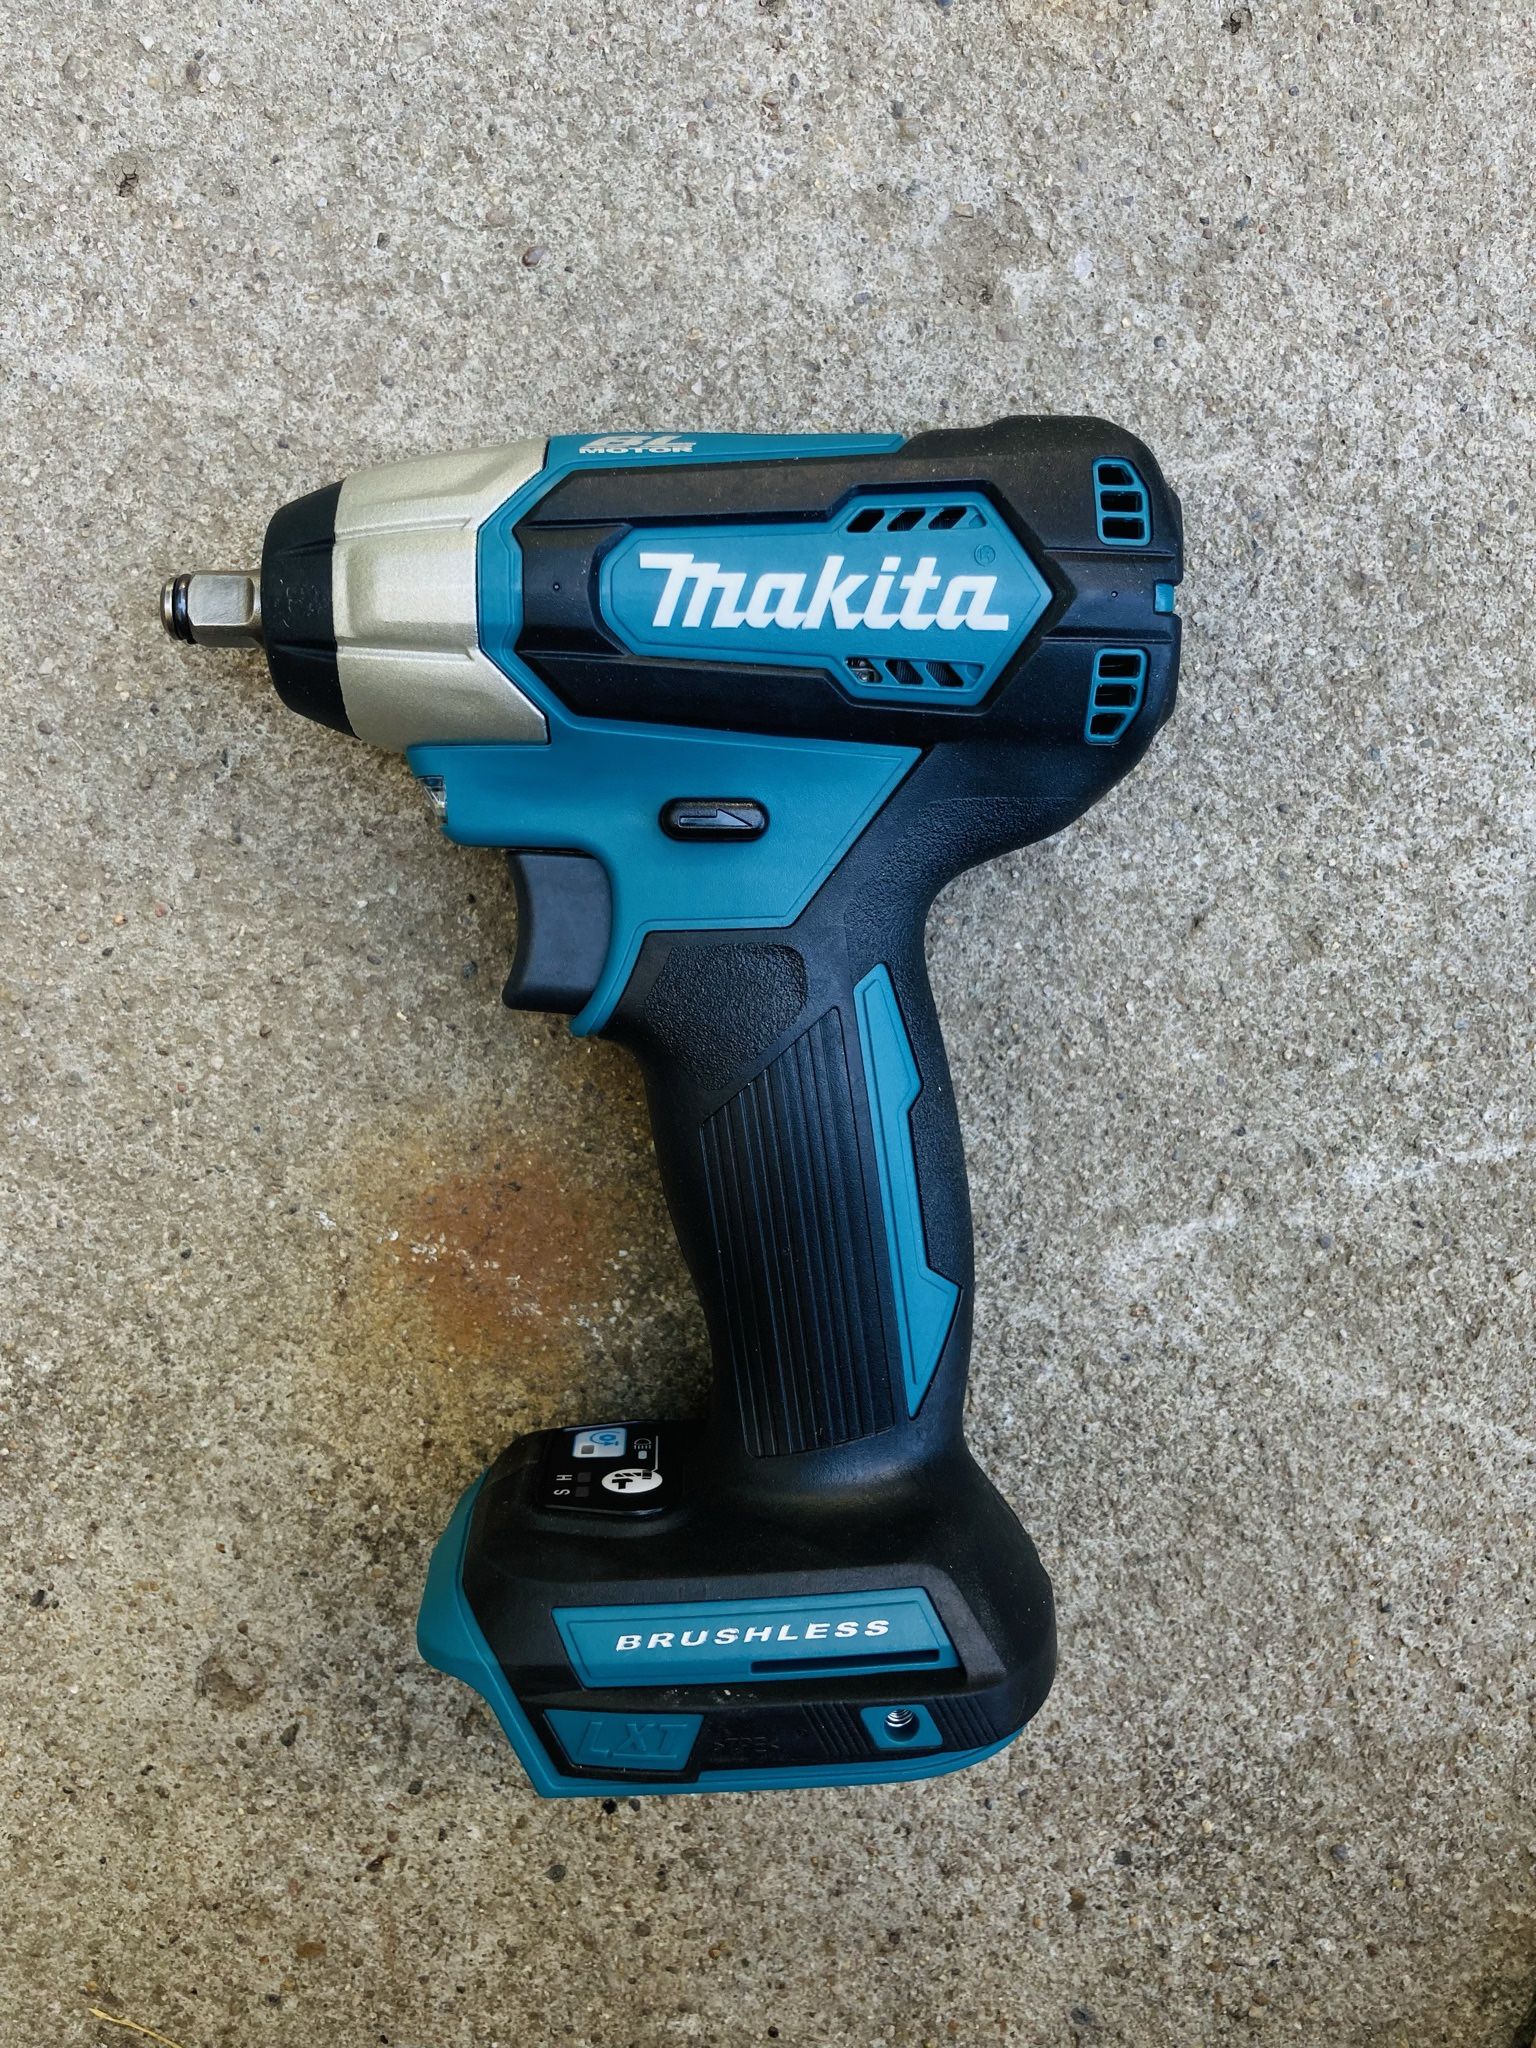 New Makita 18v LXT Brushless 3/8” Impact Wrench Compact (Tool Only)